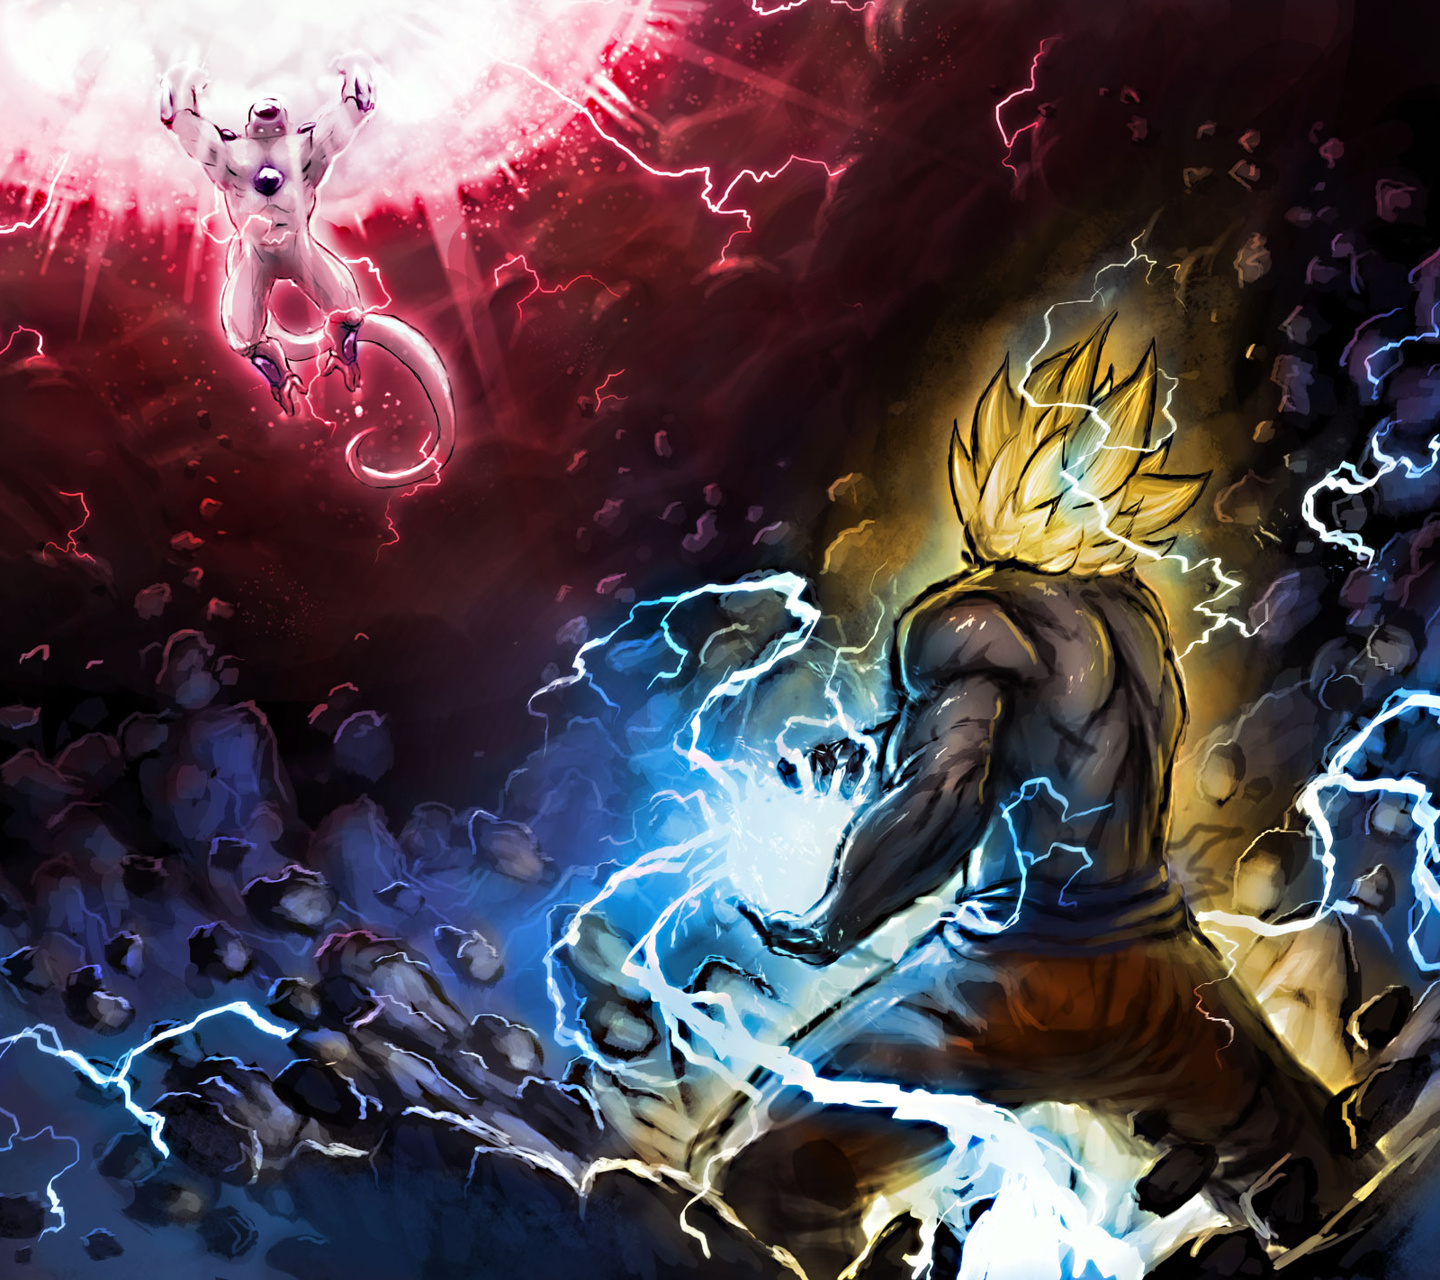 The Best DBZ pics and Art!